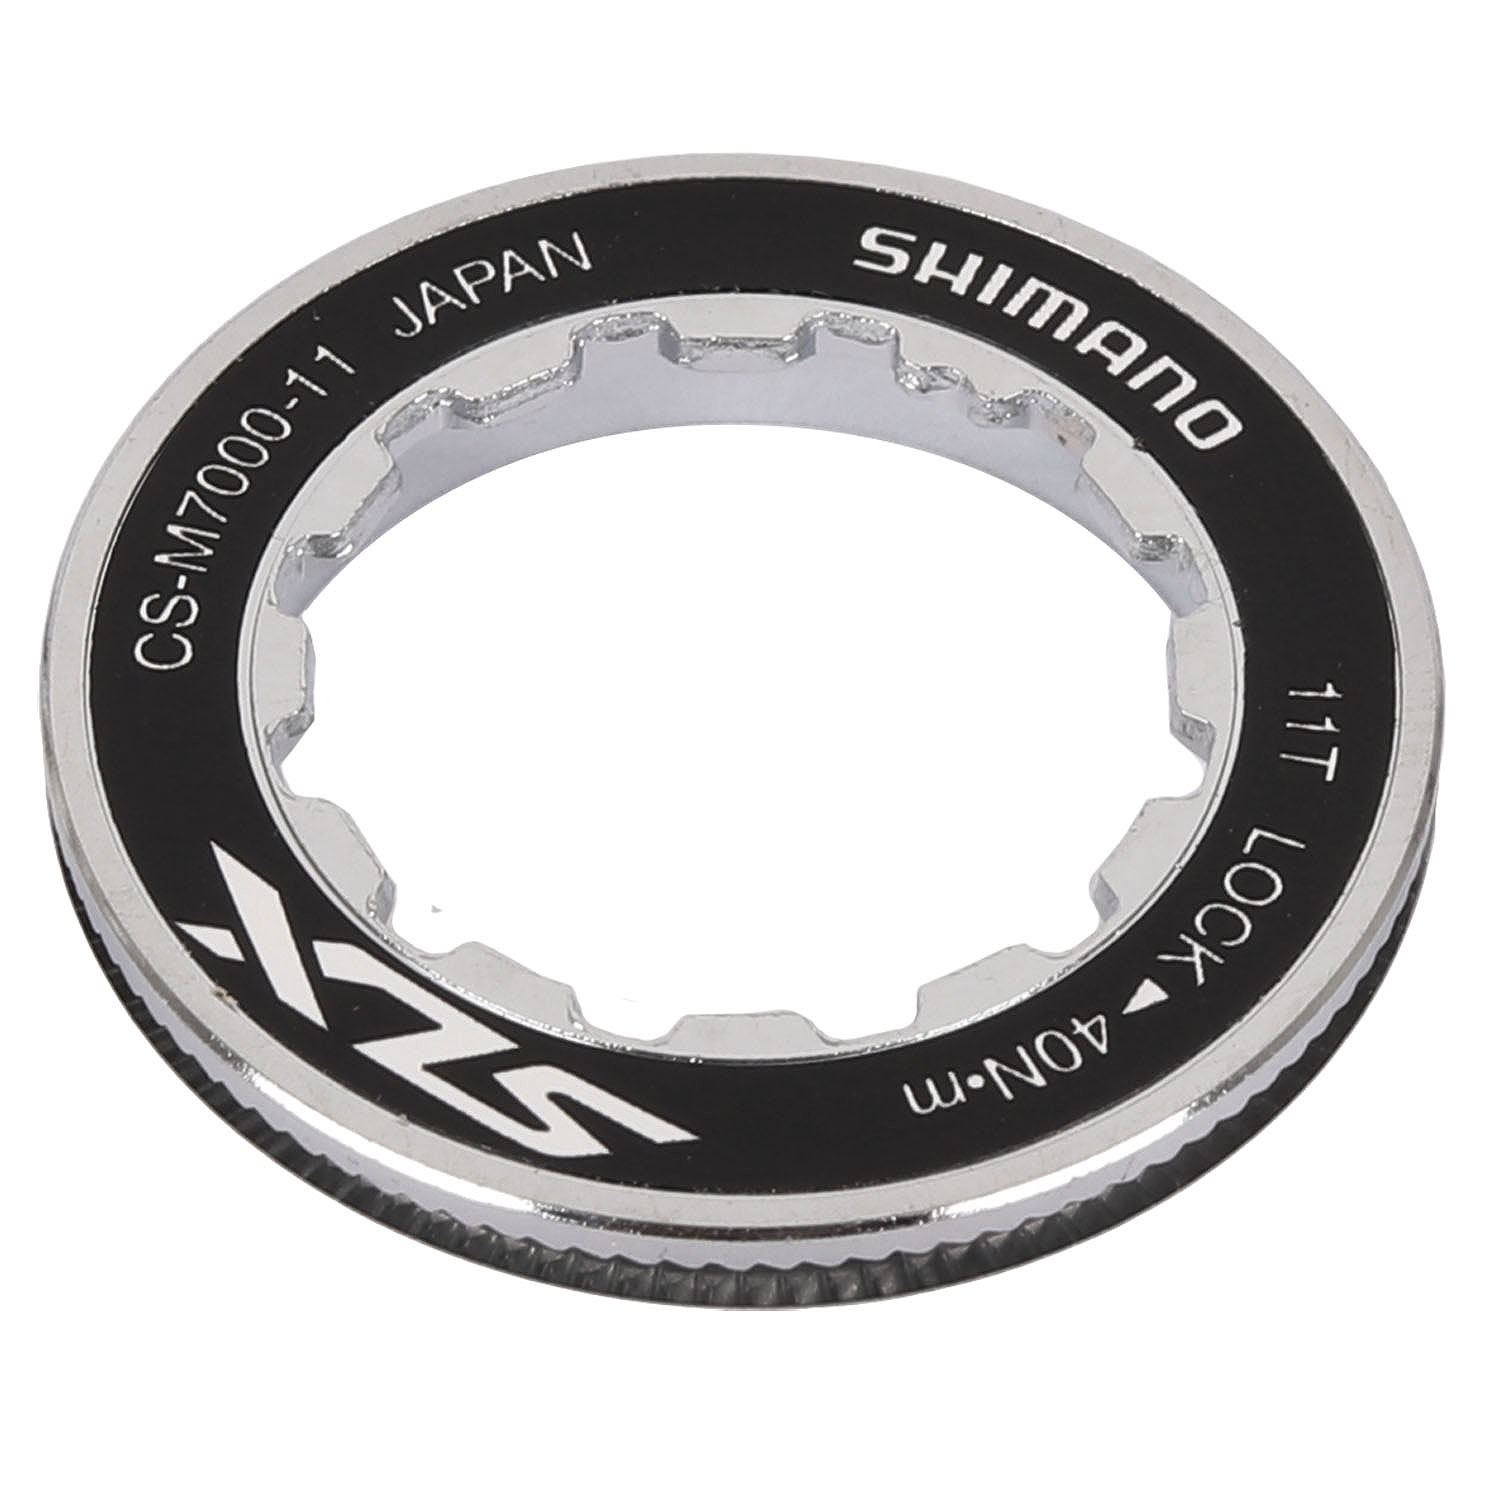 Picture of Shimano Lock ring + Spacer for SLX 11-speed Cassette - CS-M7000 - (Y1VN98010)